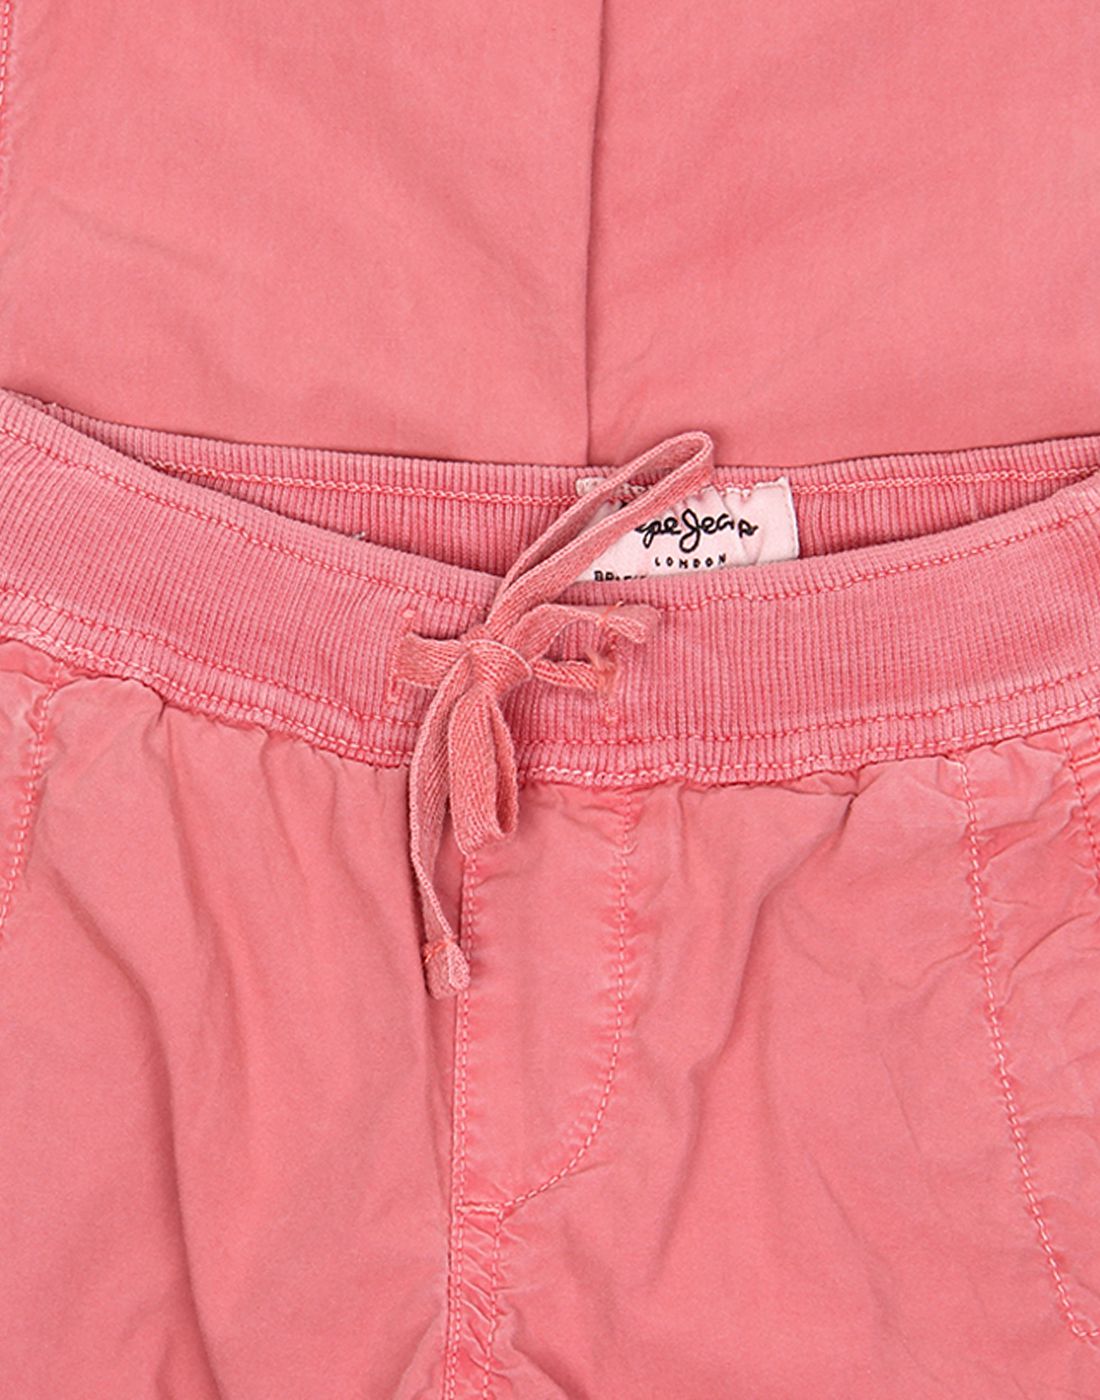 Pepe Jeans Pink Cotton Pant - Buy Pepe Jeans Pink Cotton Pant Online at ...